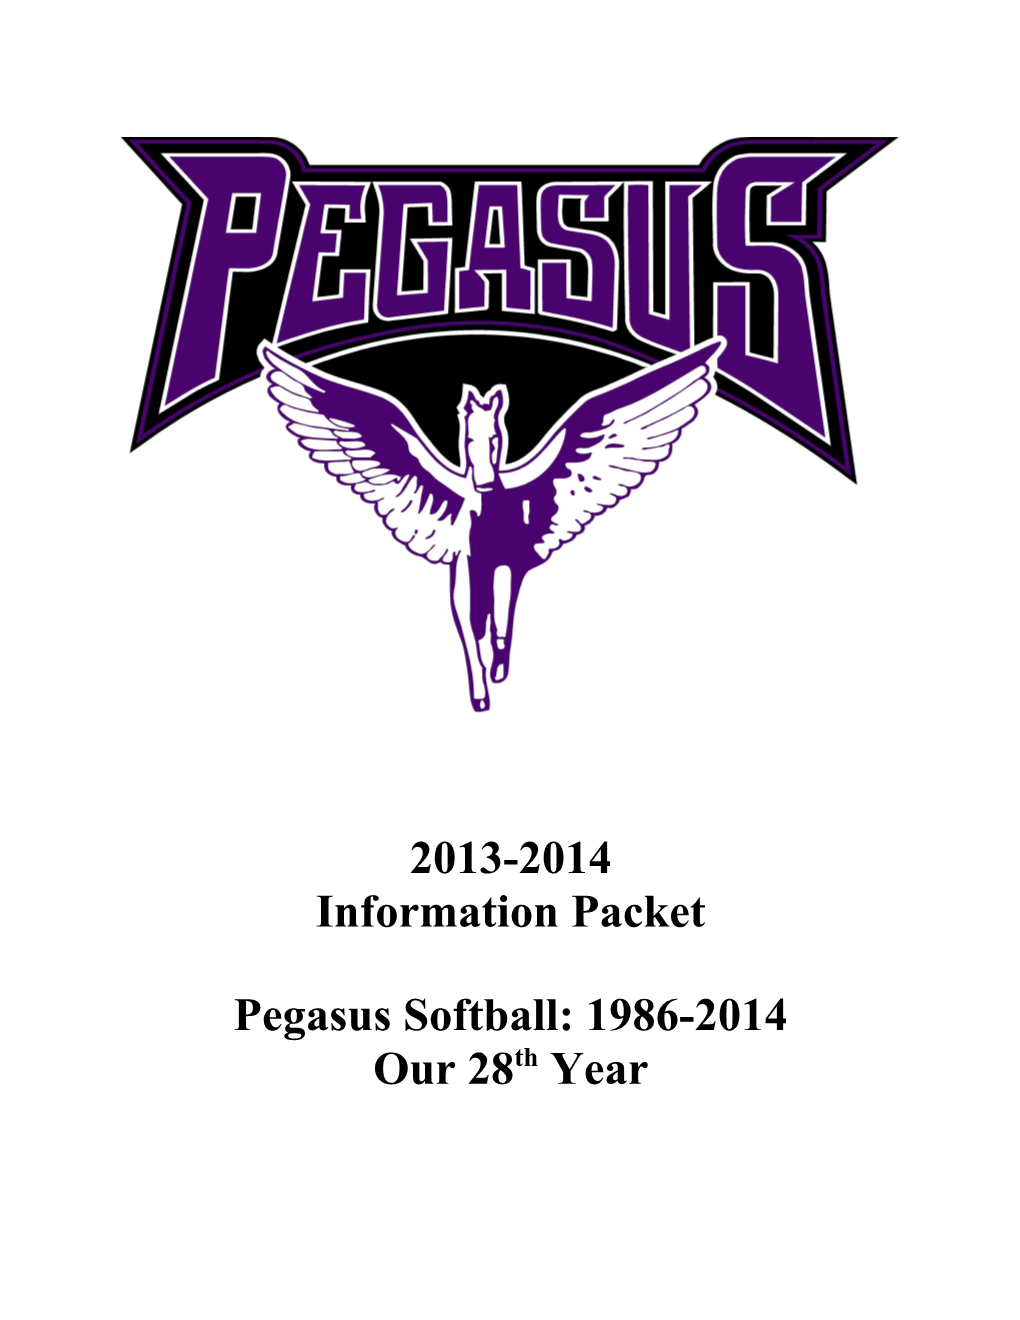 Welcome to the Pegasus 2003-2004 Tryouts